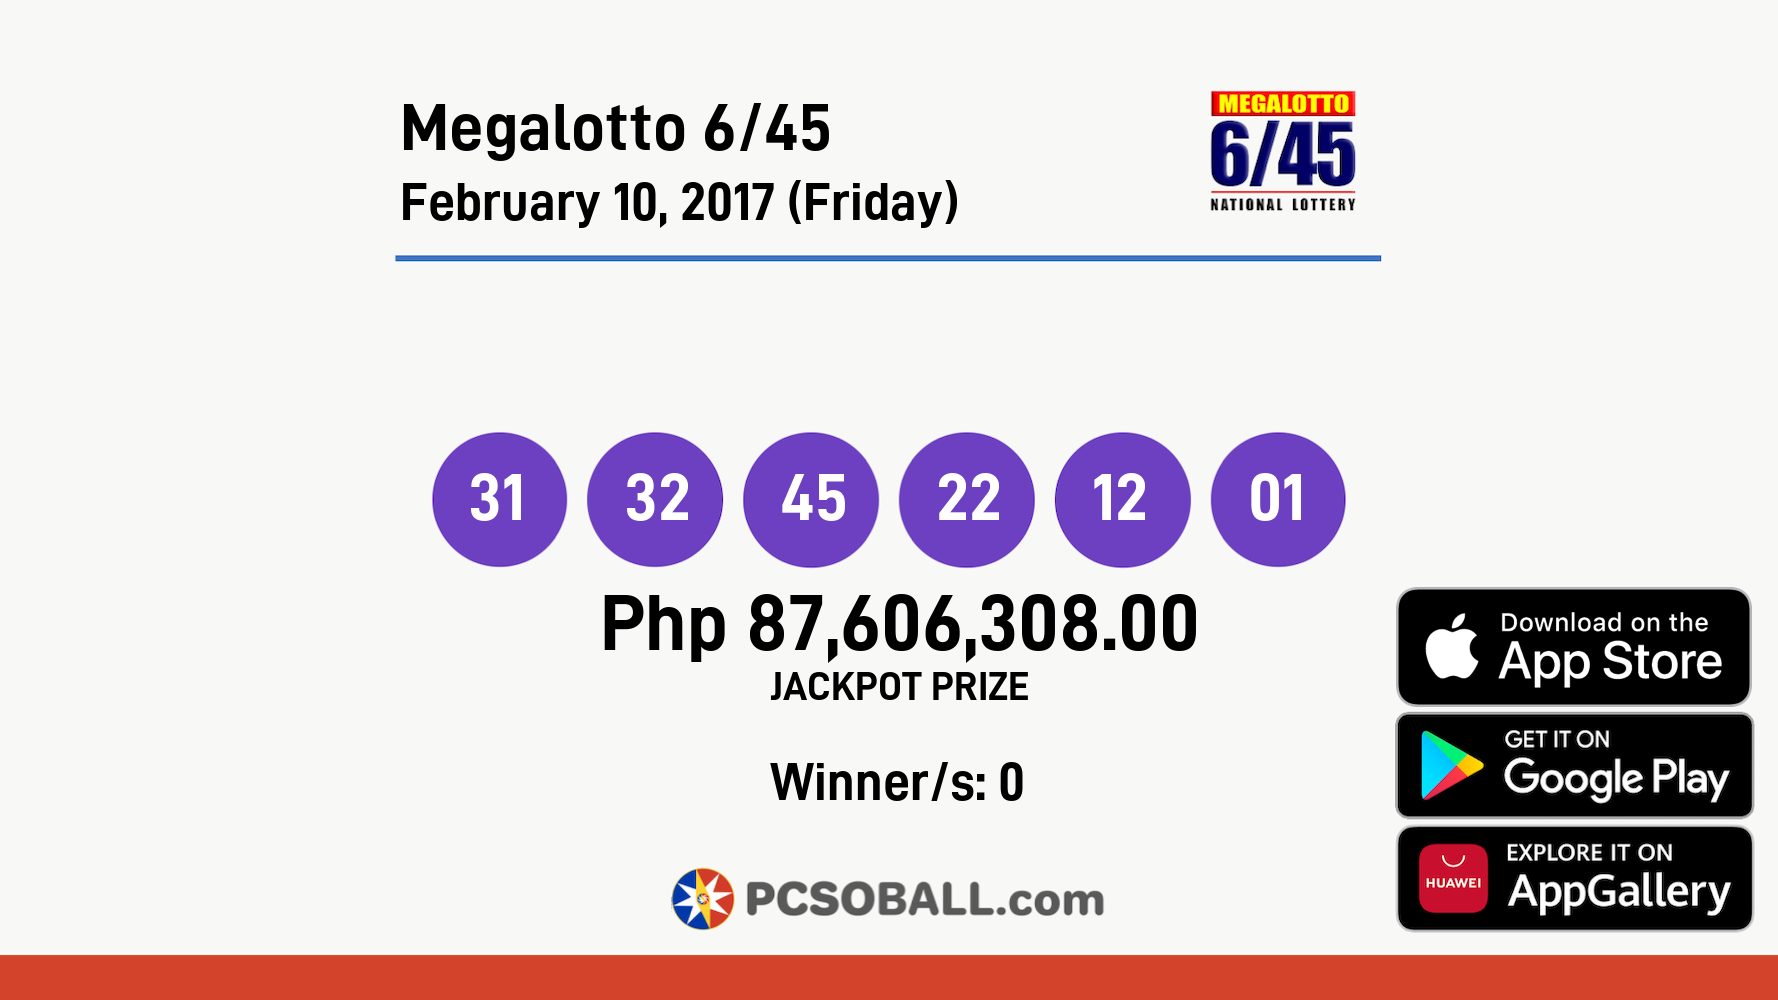 Megalotto 6/45 February 10, 2017 (Friday) Result